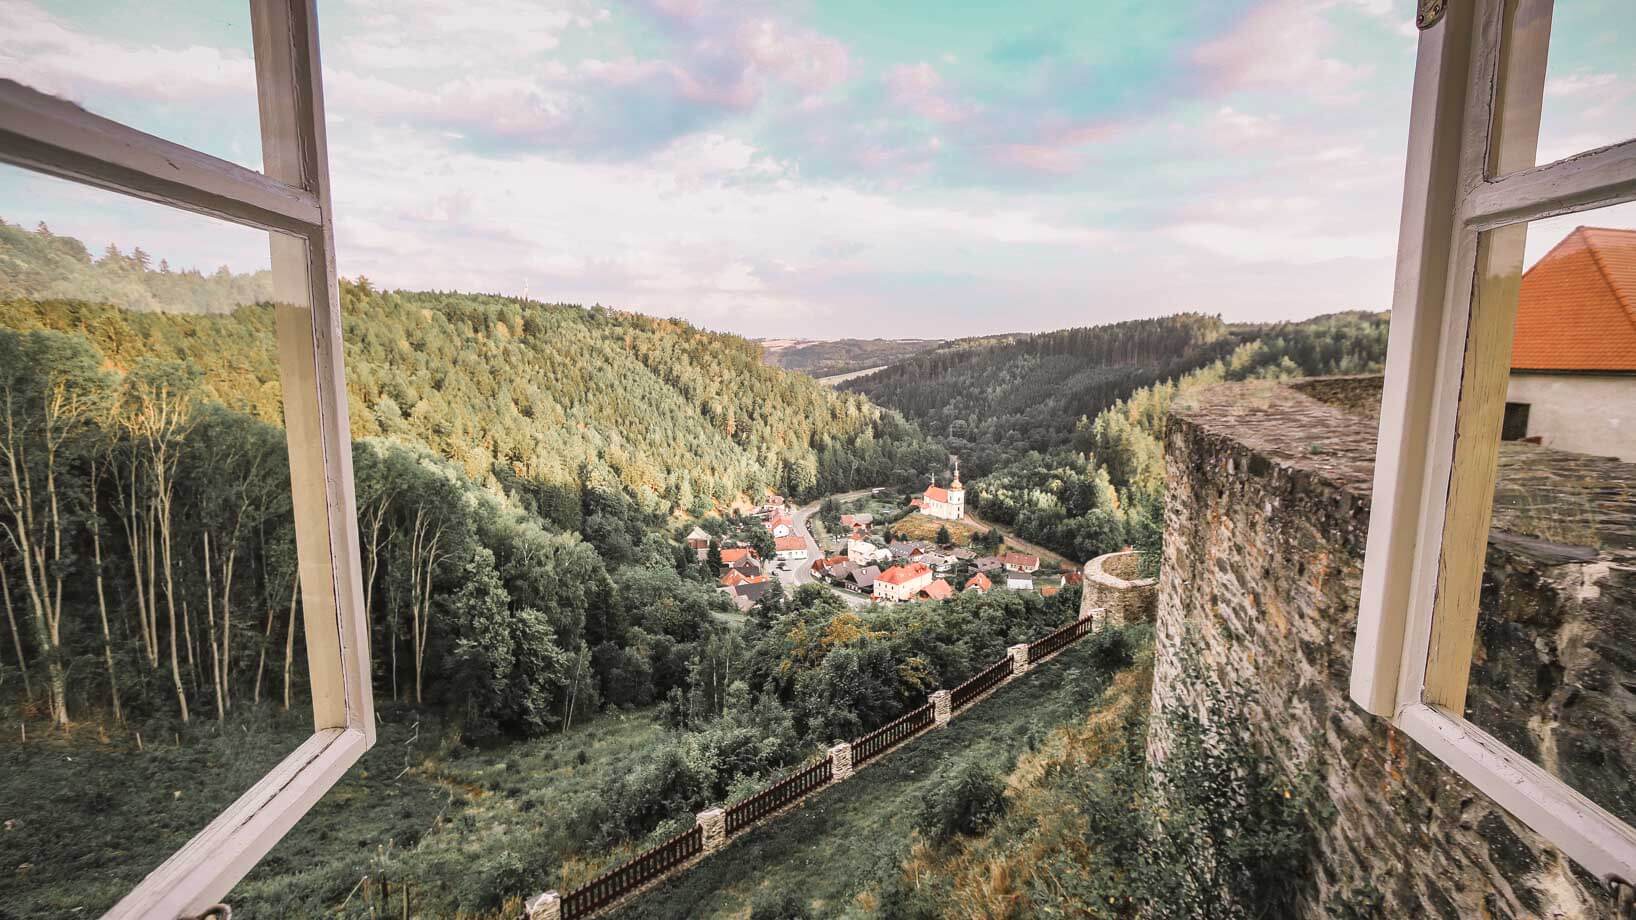 Svojanov Castle Fairy-Tale Castles in Czech Republic That You Didn't Know About-2